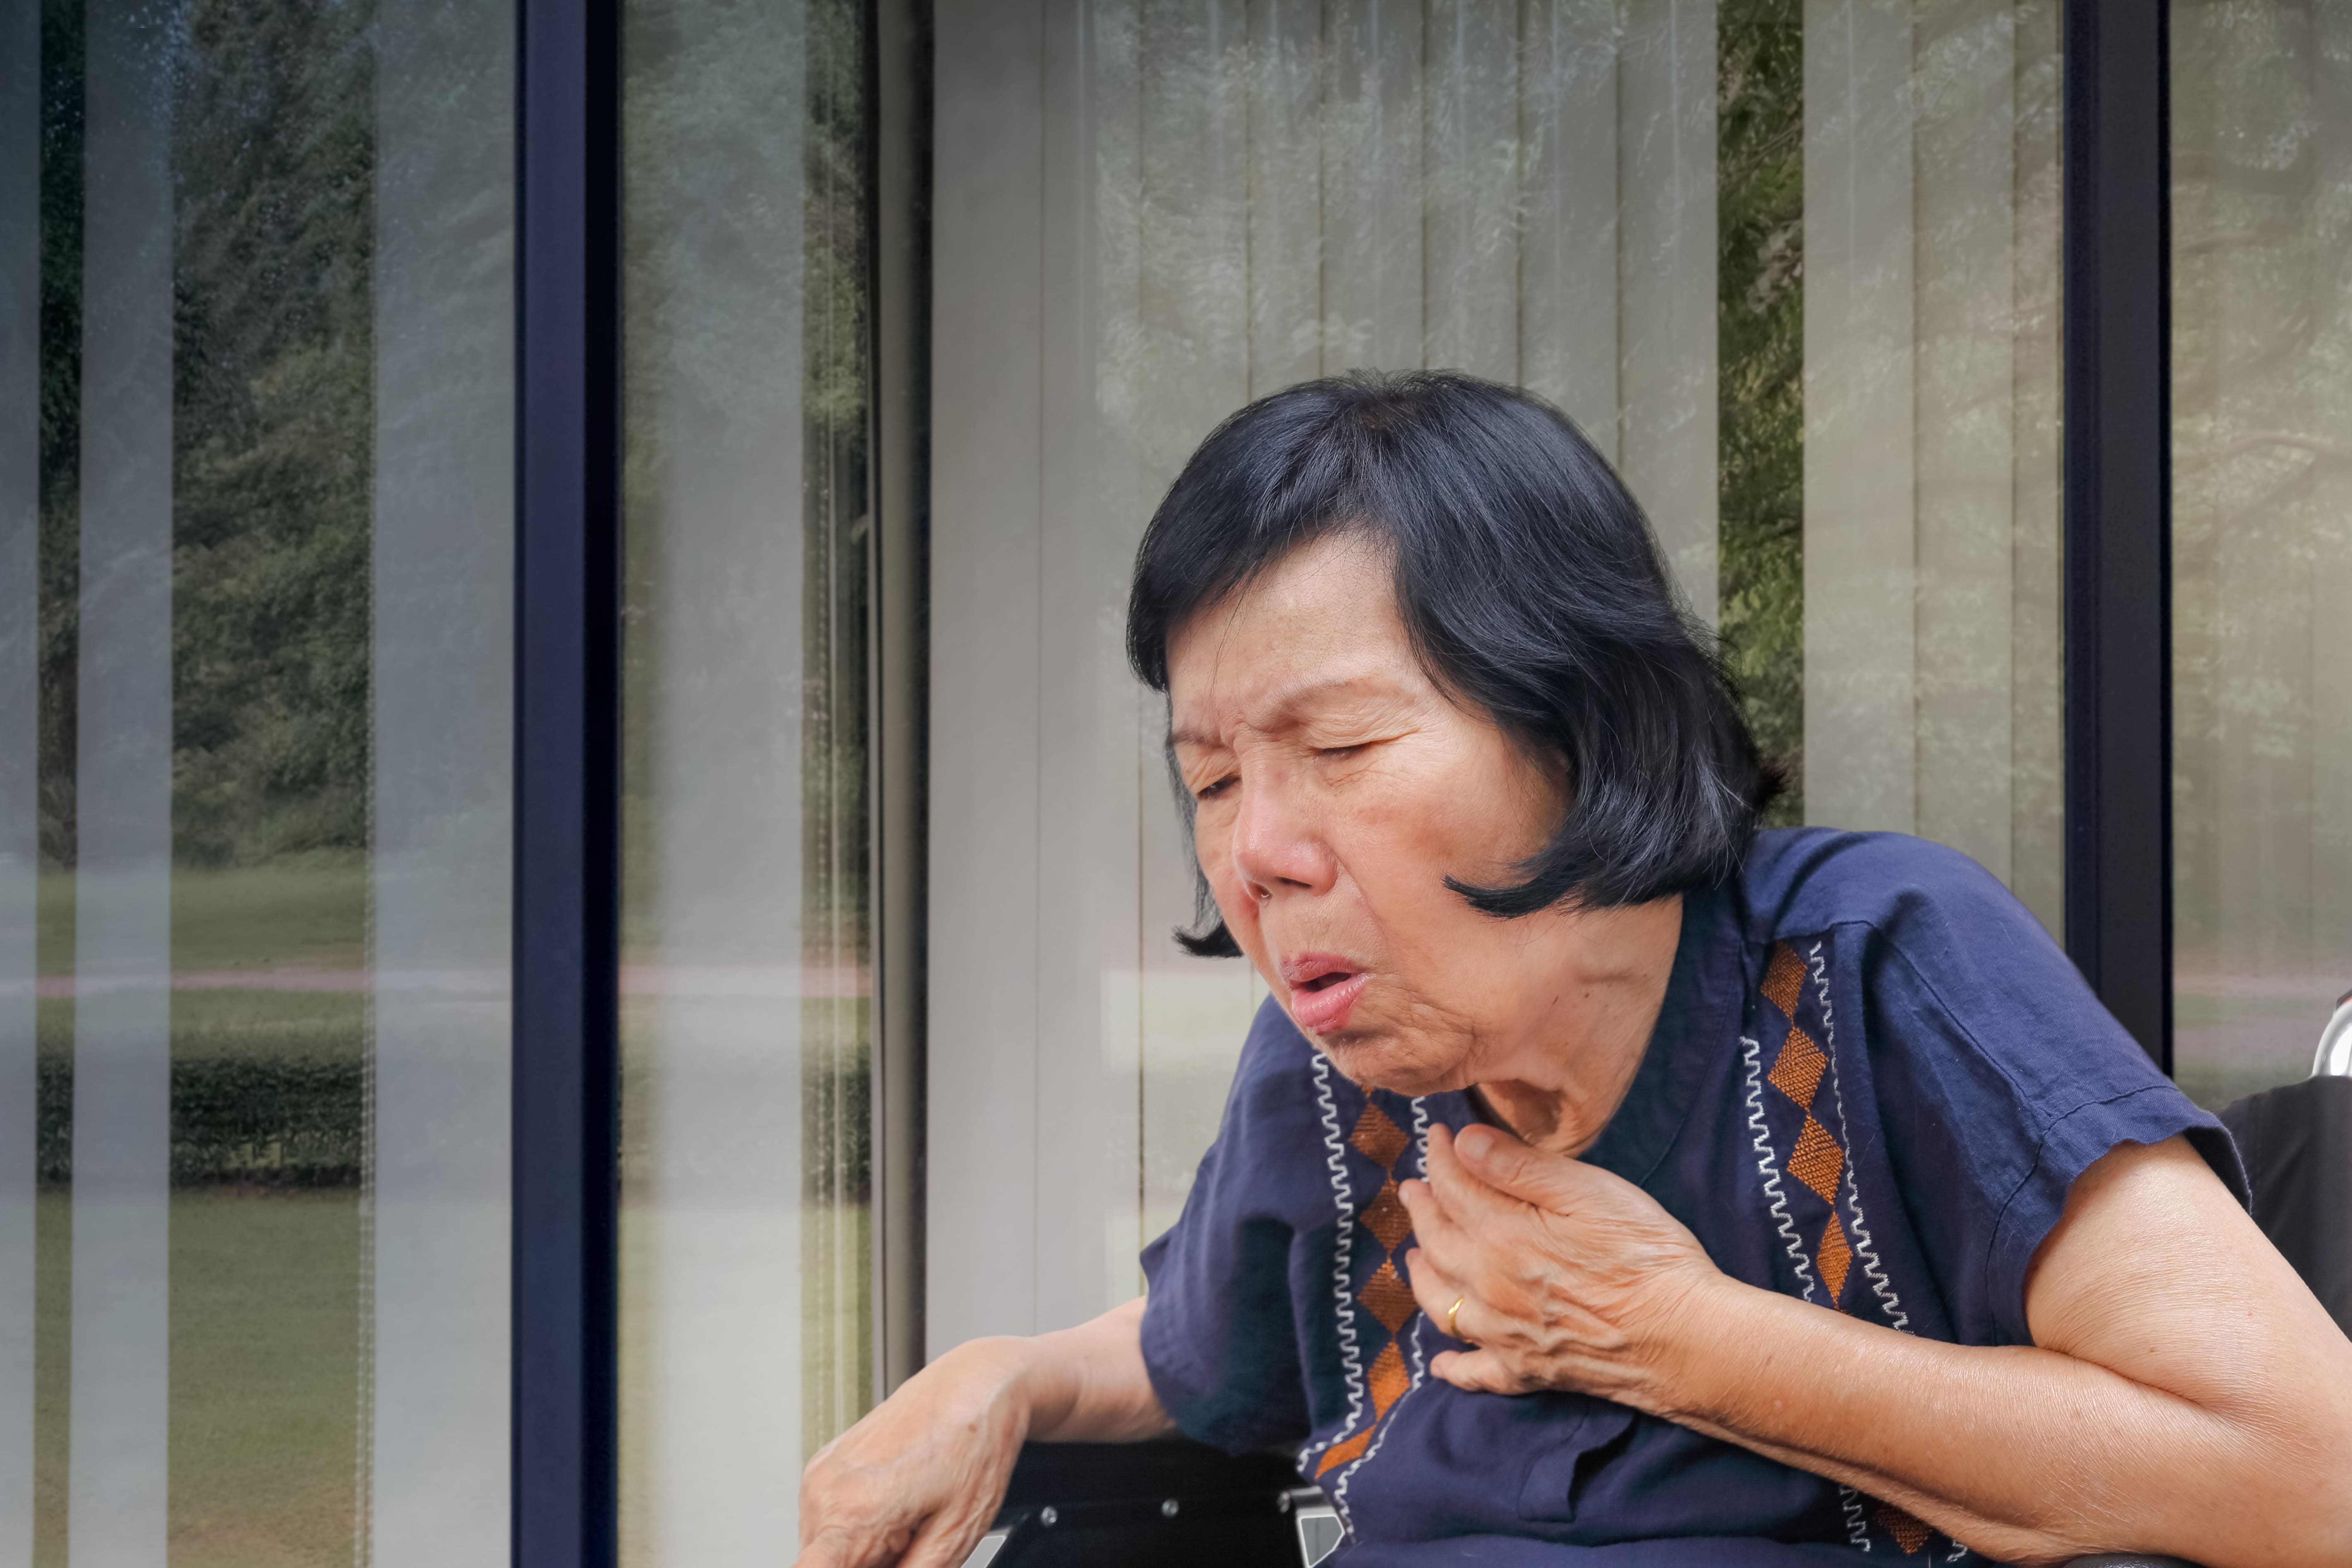 Woman coughing with hand on chest.